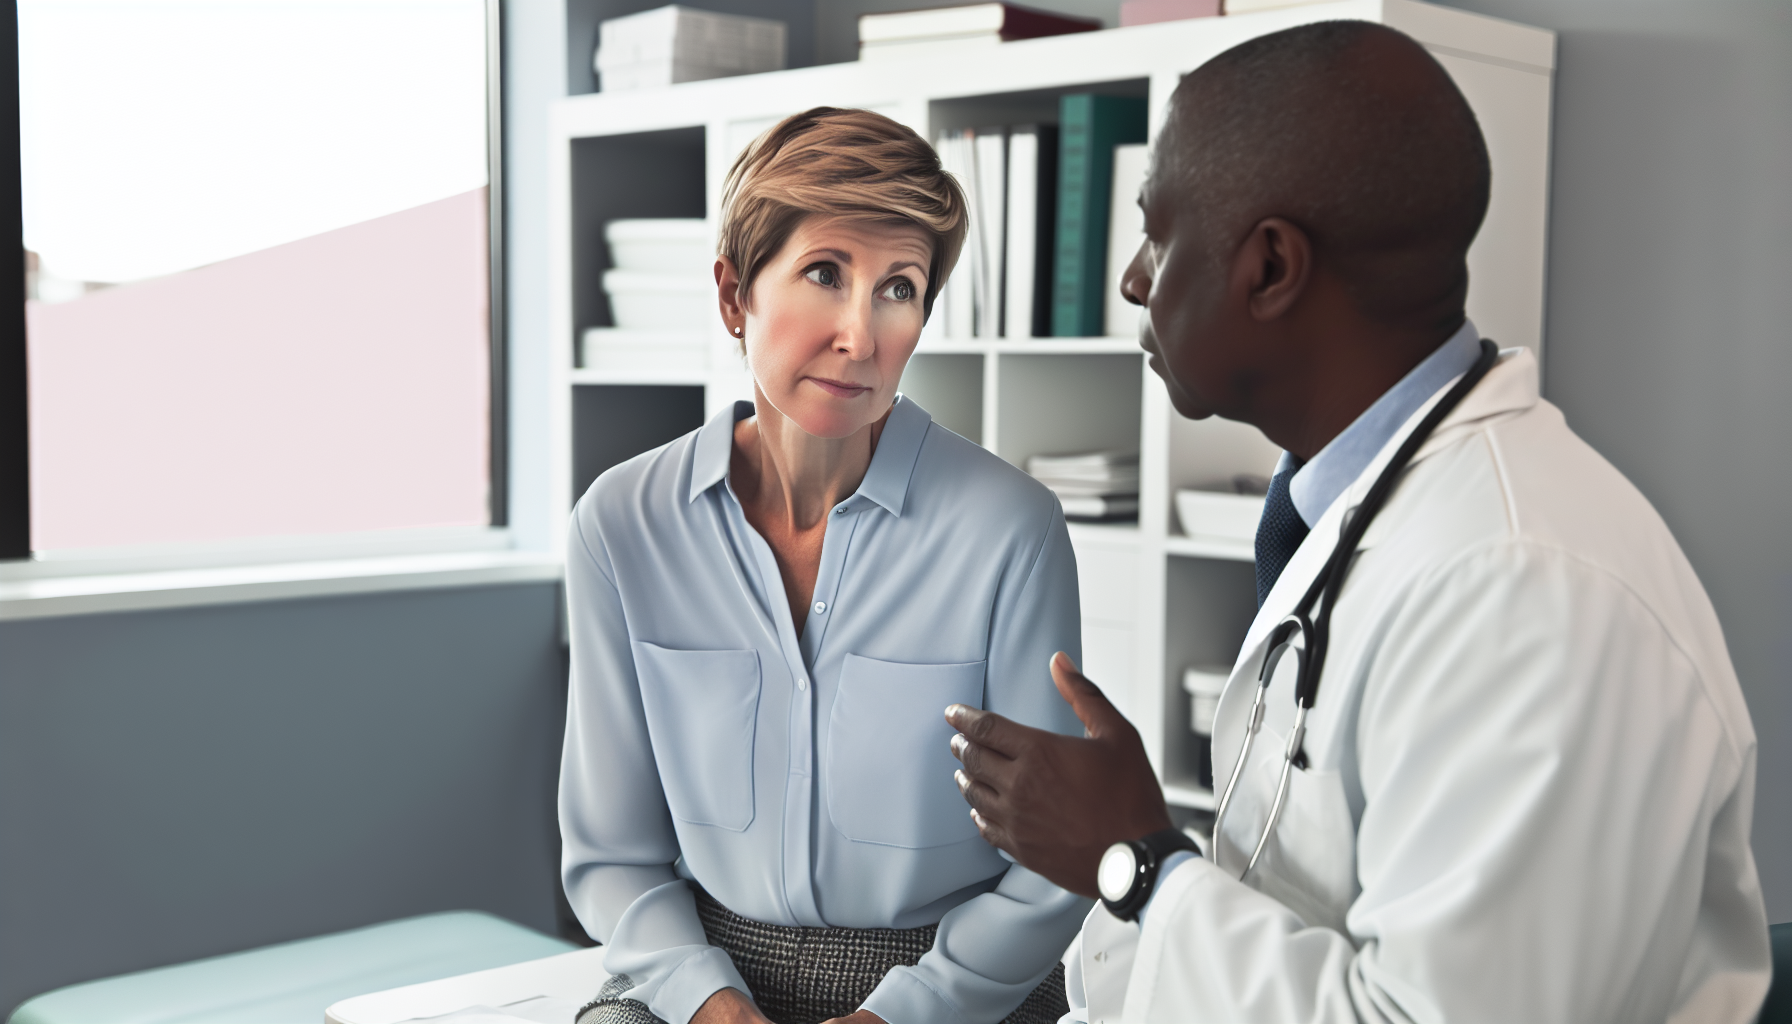 Photo of a person consulting a doctor